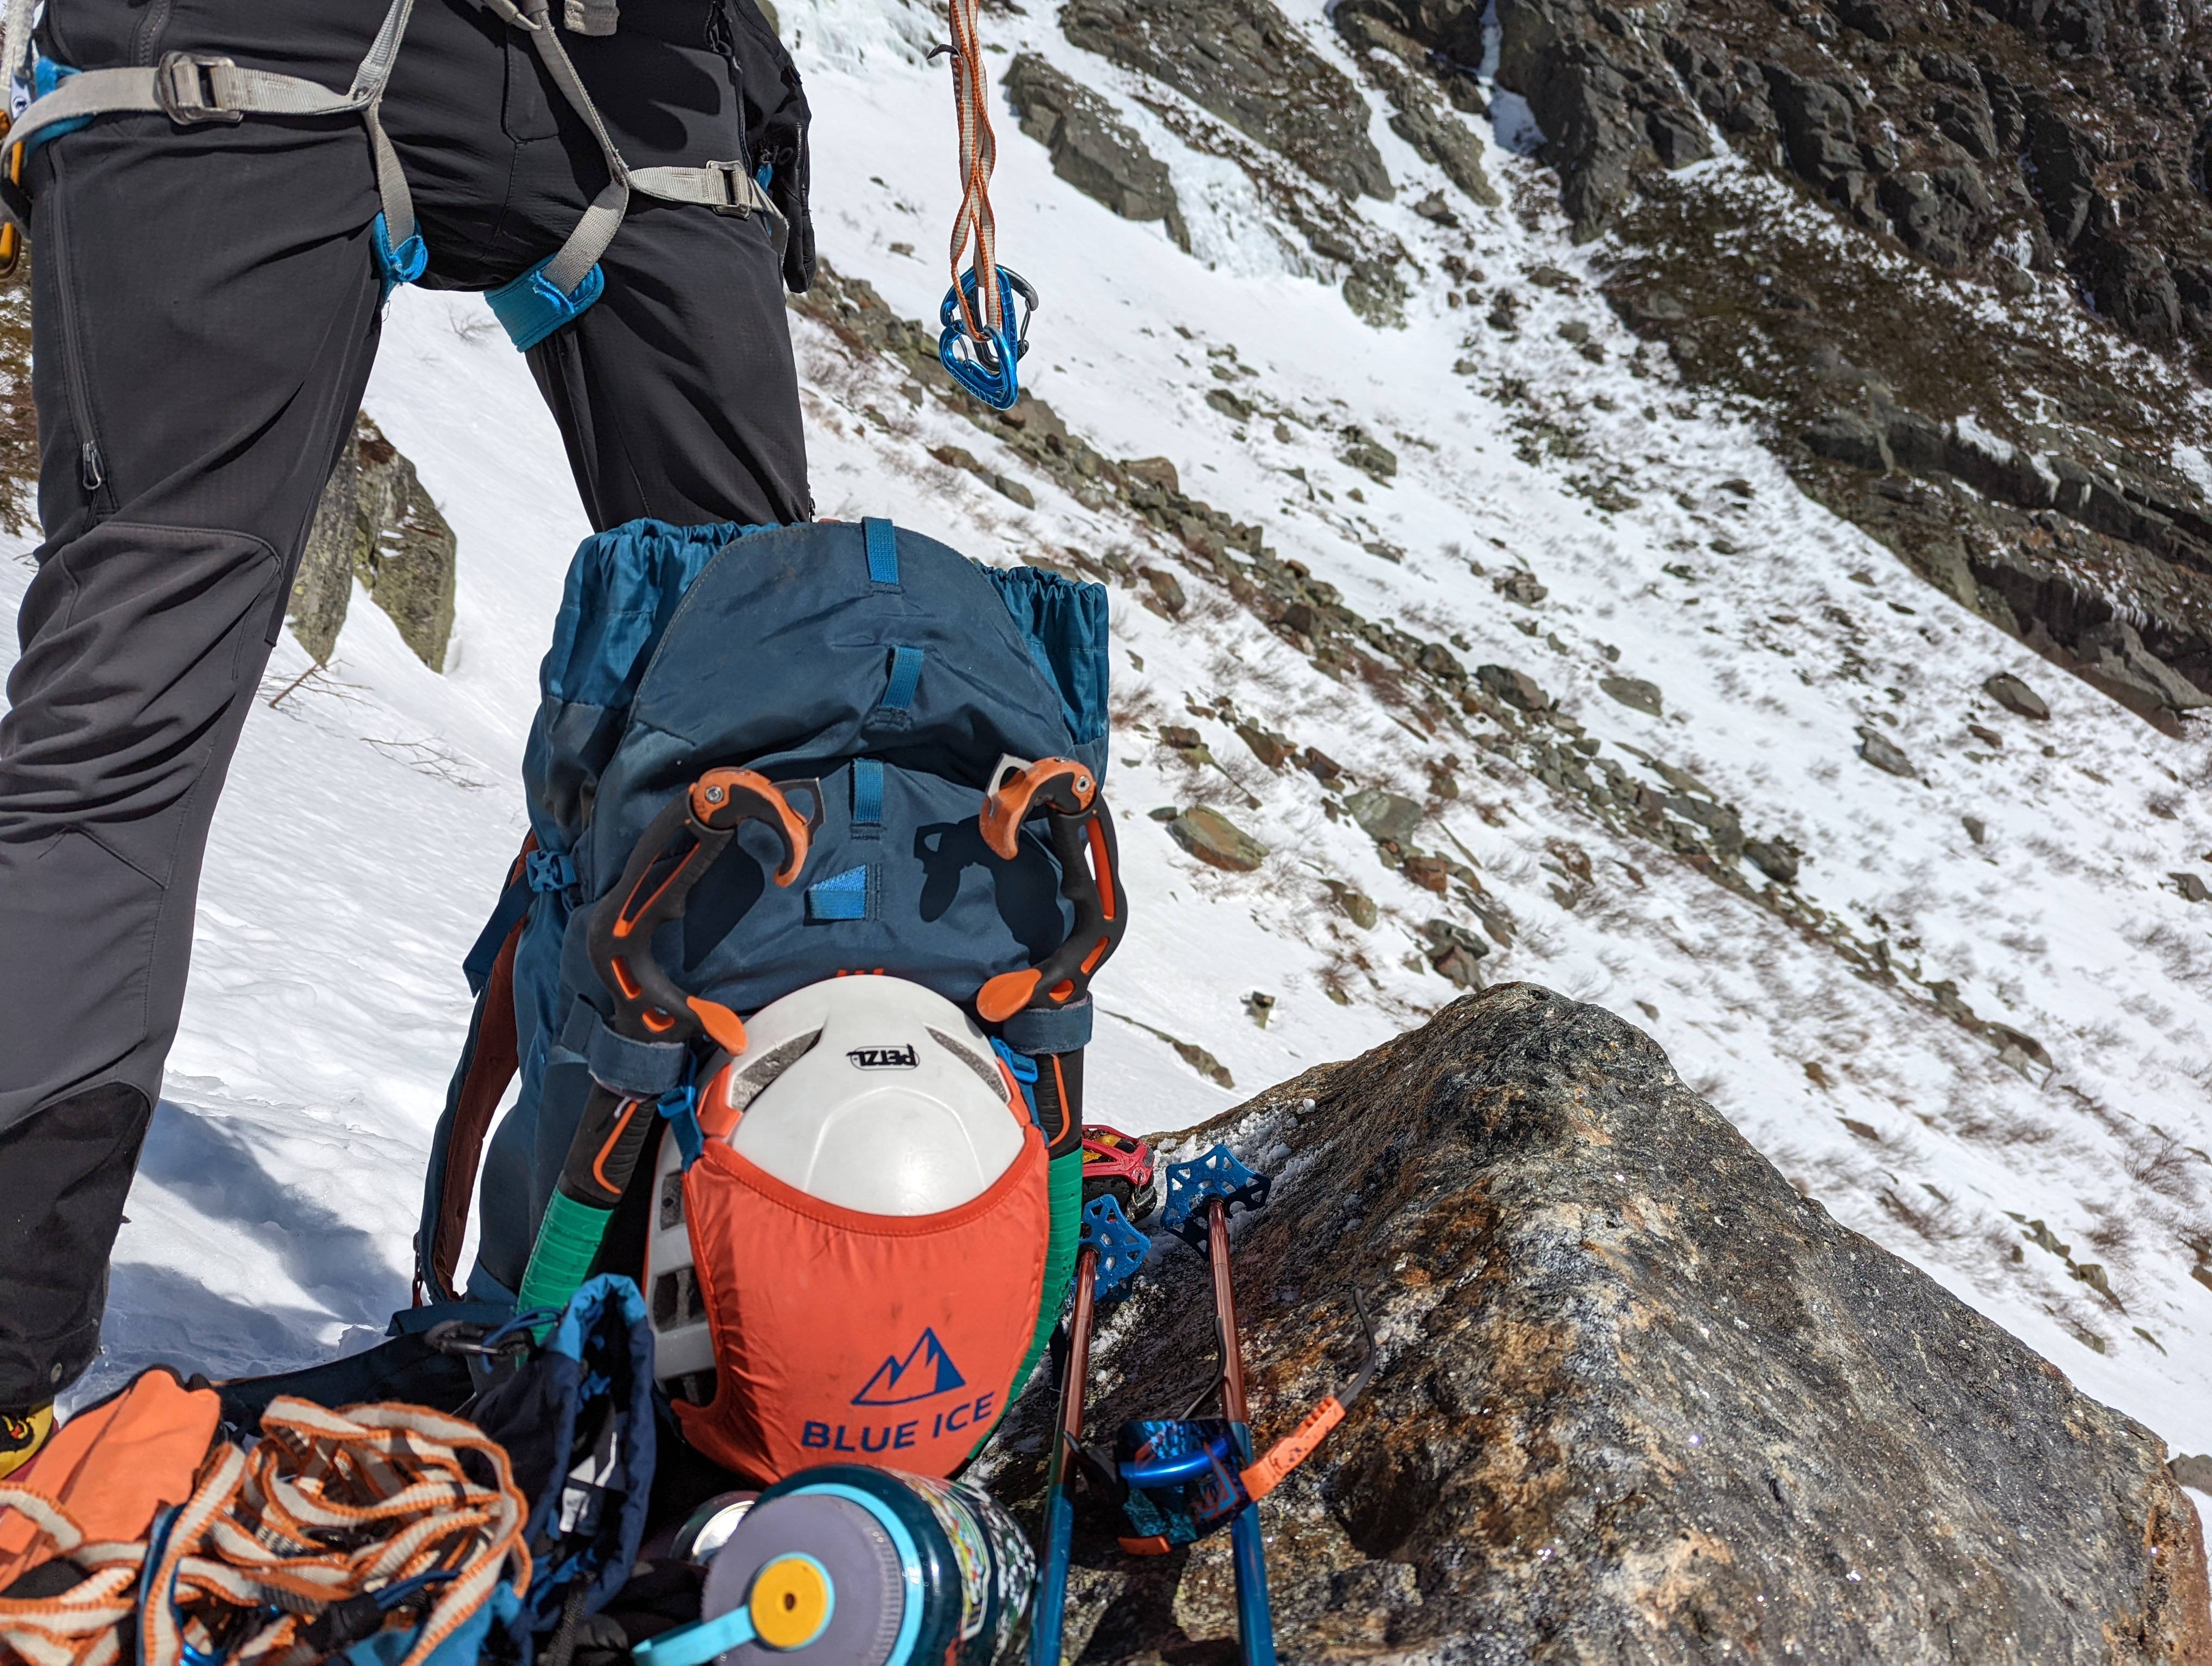 "Bag the gear to bag the summit"